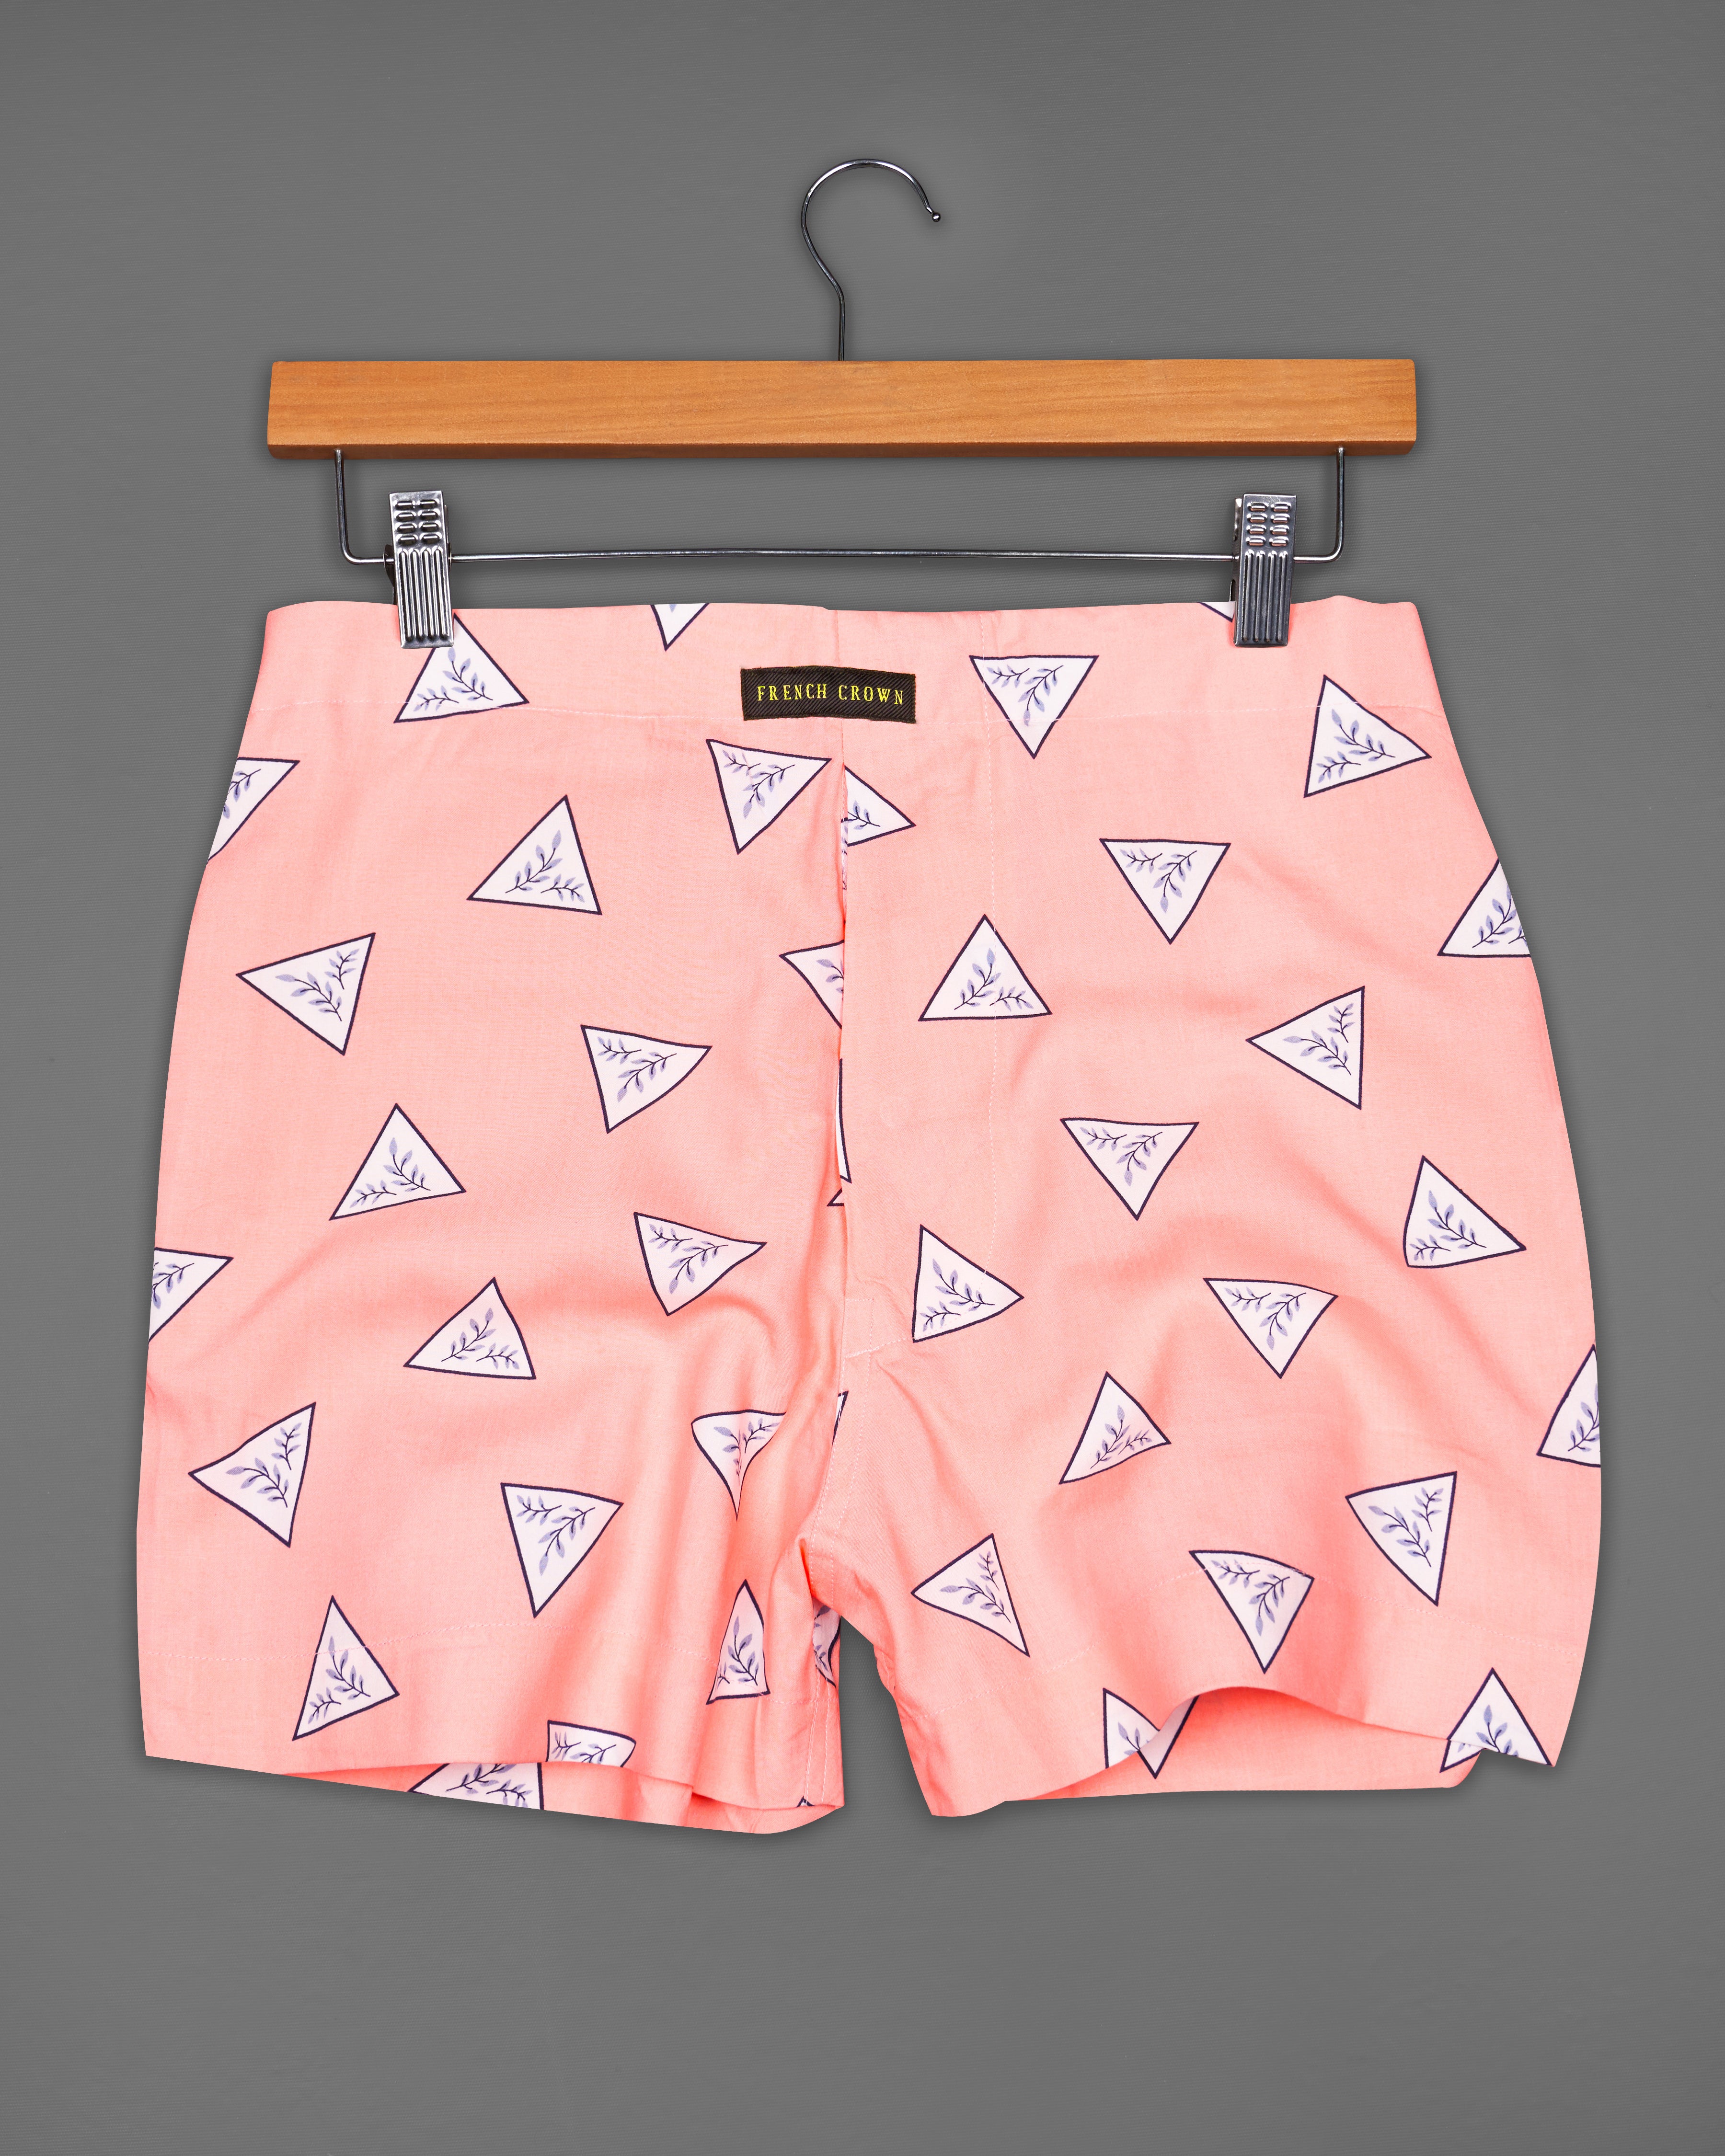 Oyster Peach Triangle Printed and Mindaro Leamon Rose Printed Premium Cotton Boxers BX449-BX450-28, BX449-BX450-30, BX449-BX450-32, BX449-BX450-34, BX449-BX450-36, BX449-BX450-38, BX449-BX450-40, BX449-BX450-42, BX449-BX450-44